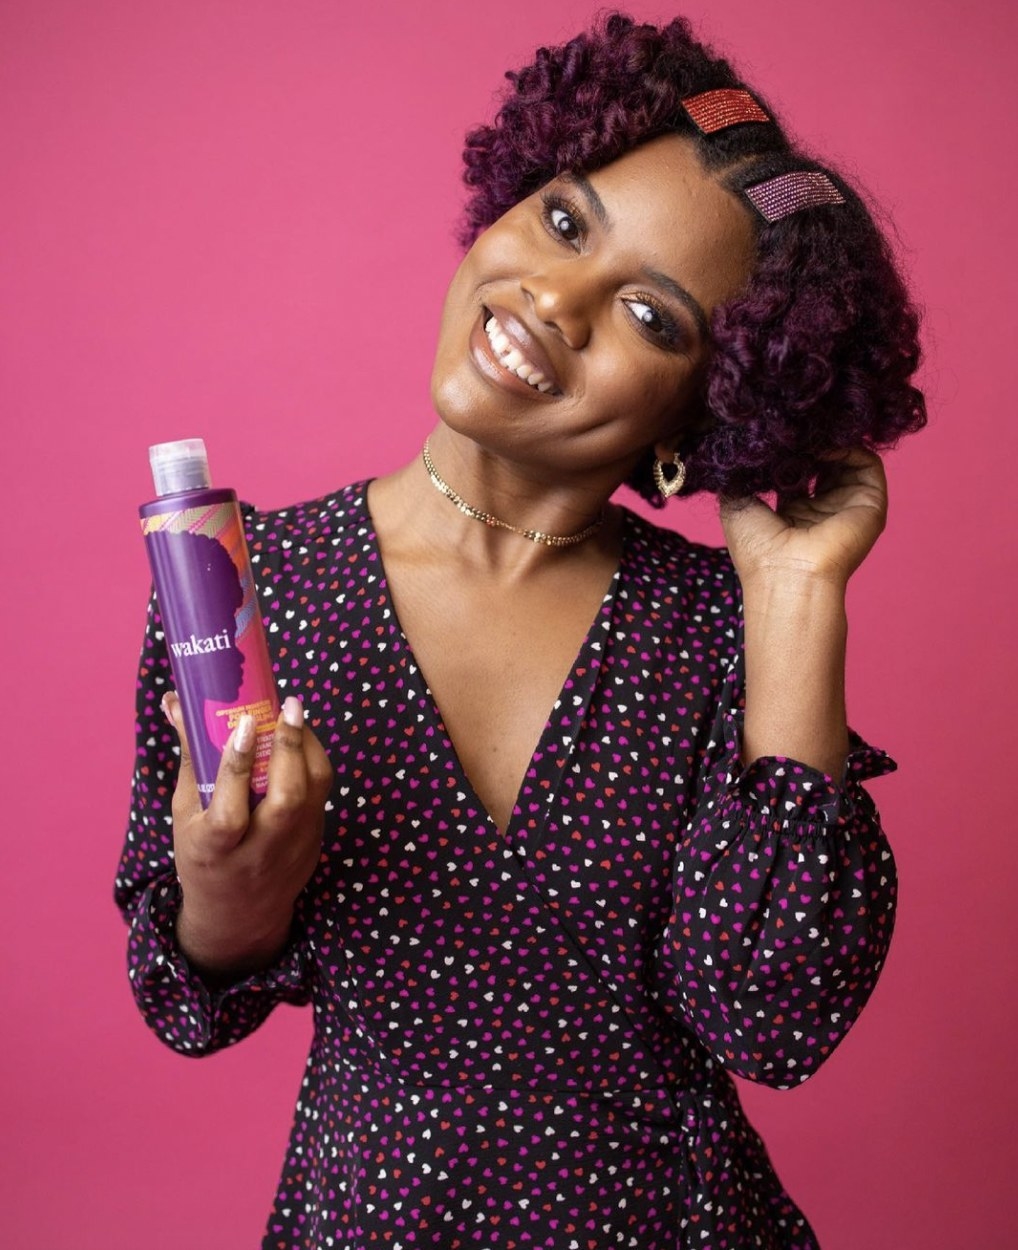 A person wearing a multicolored heart dress holding a bottle of detangling conditioner